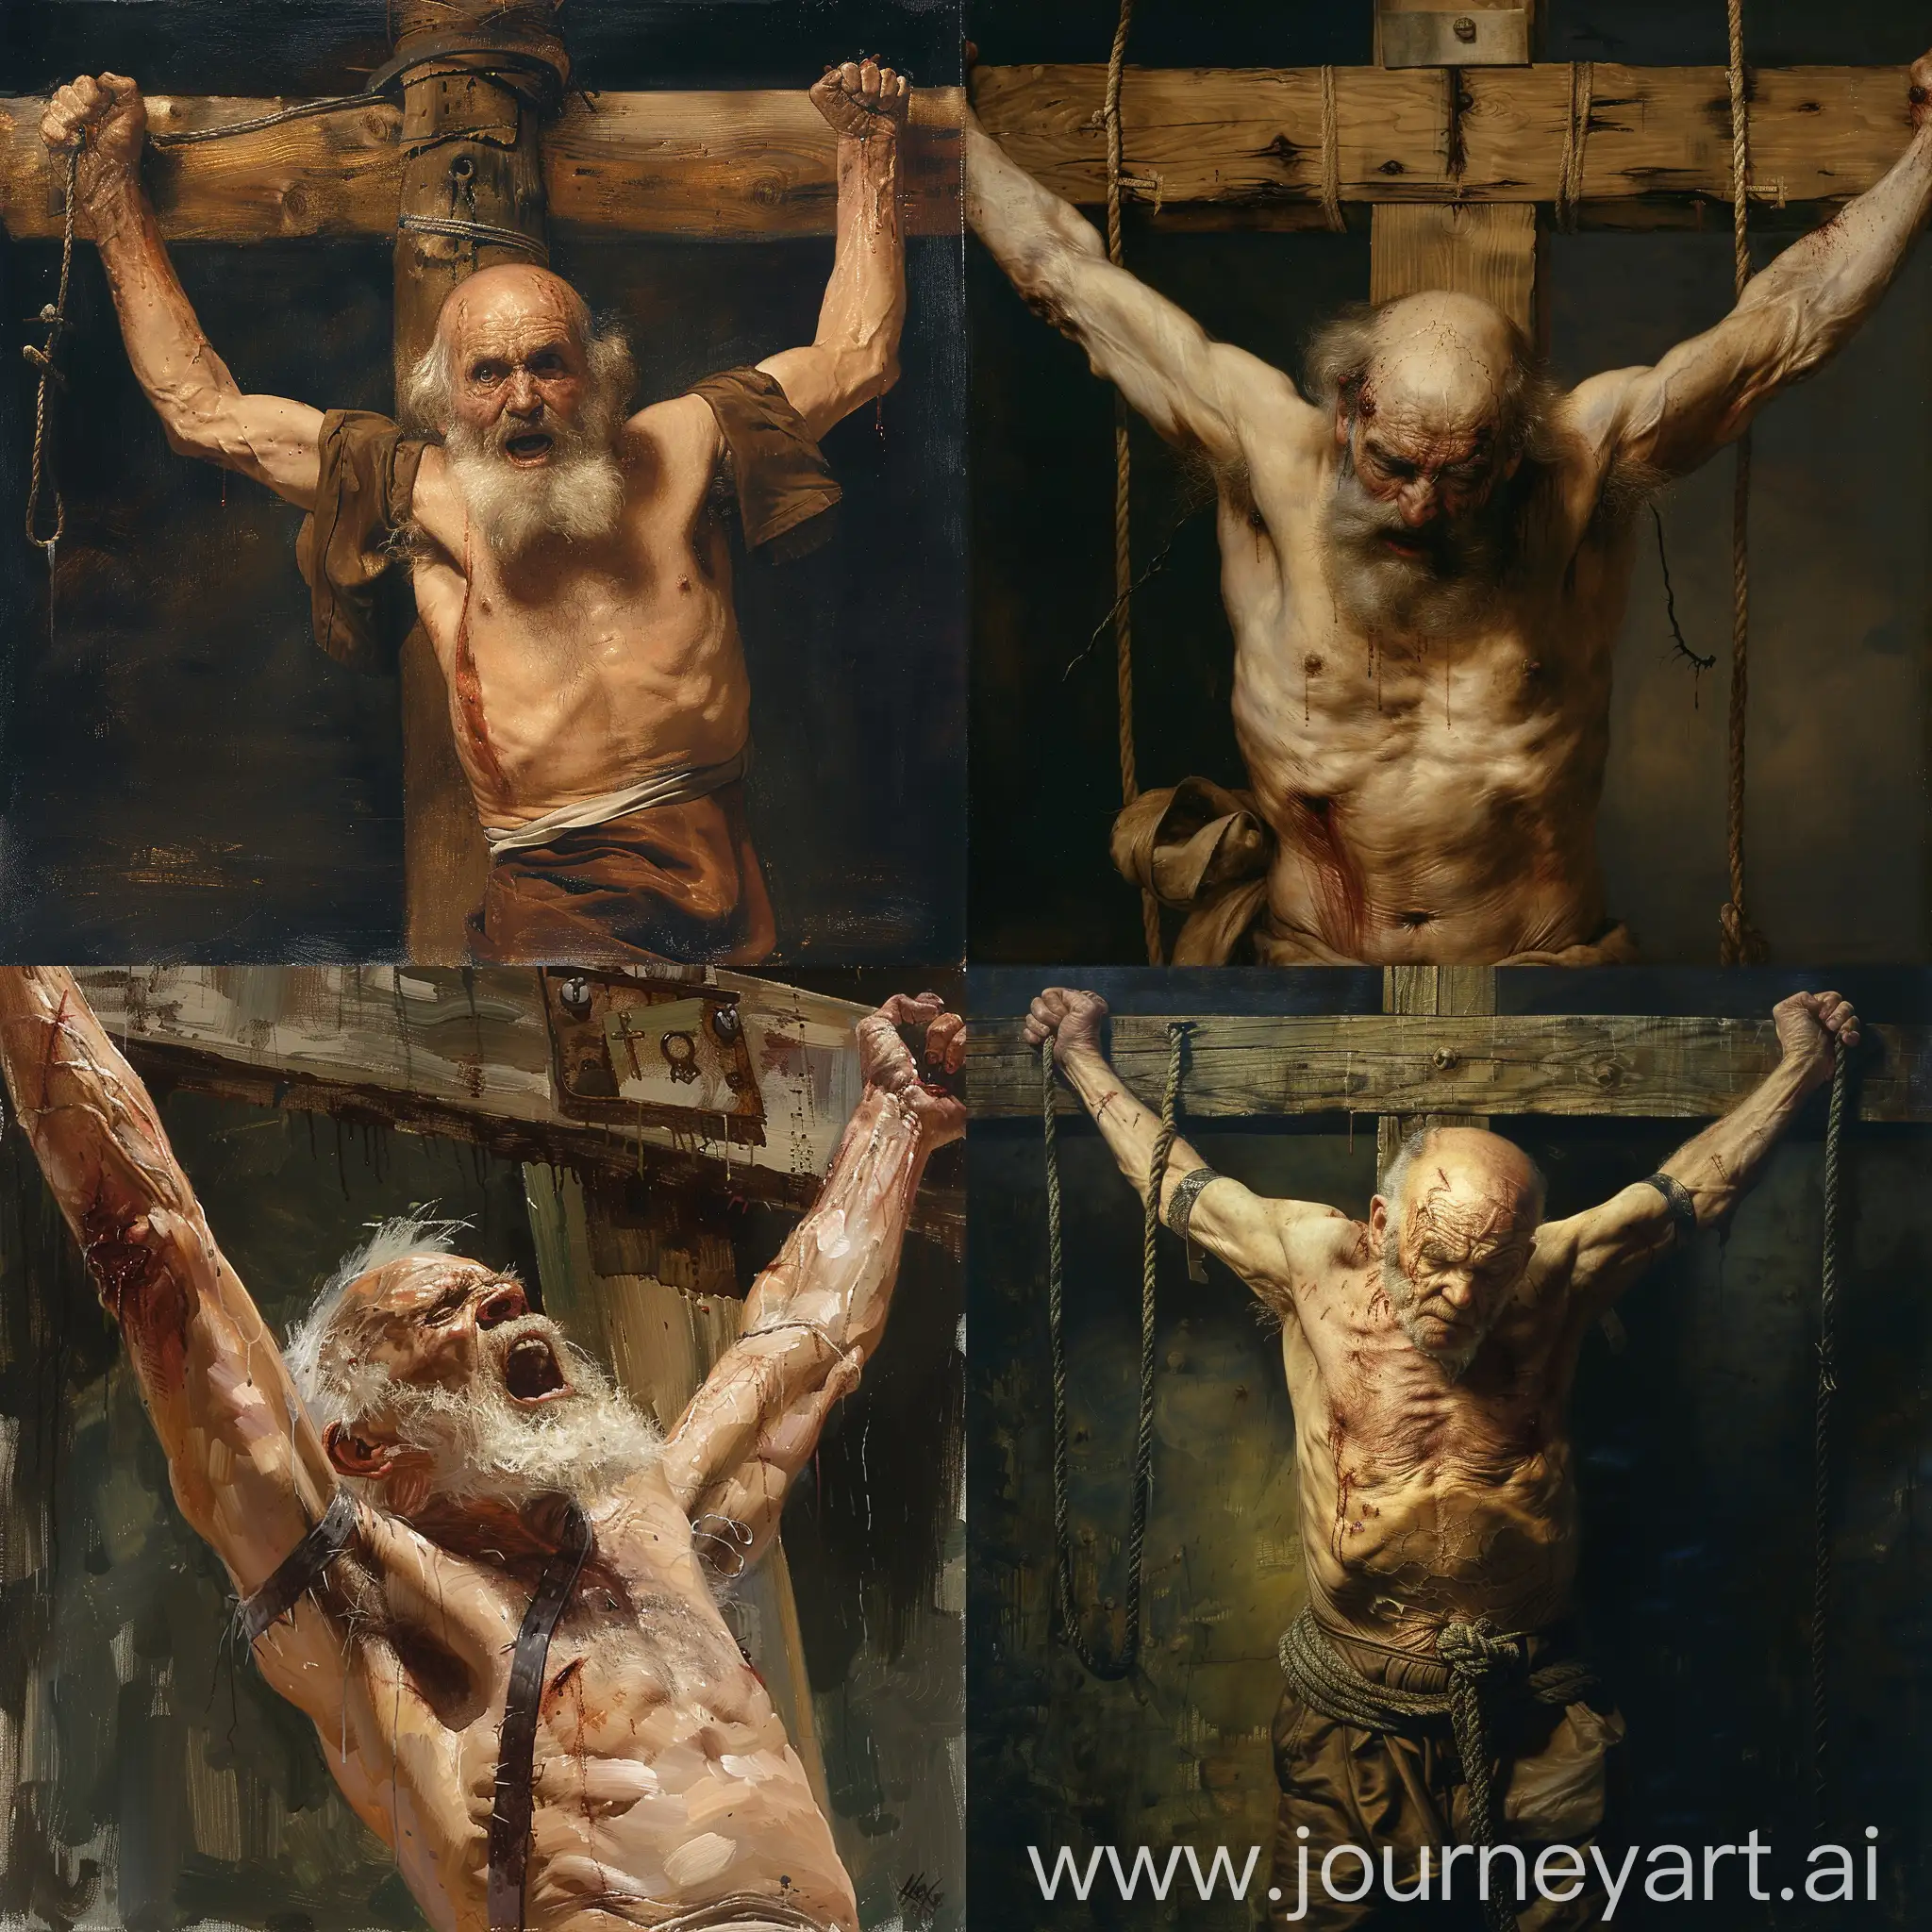 Dramatic-Depiction-of-Crucifixion-Angry-Old-Man-on-Jesus-Christs-Cross